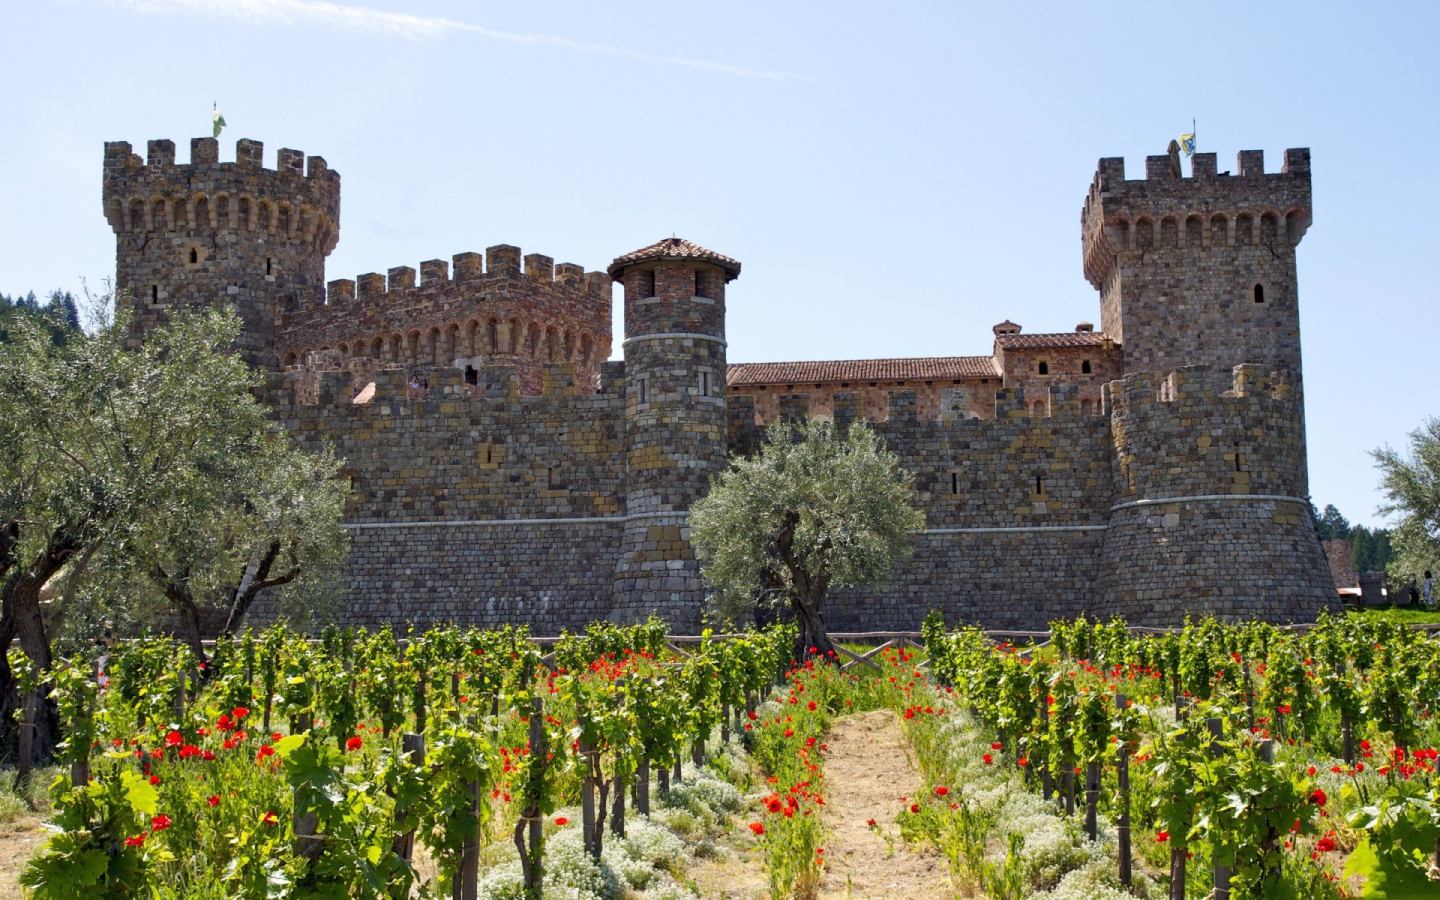 Vineyard in the fortress